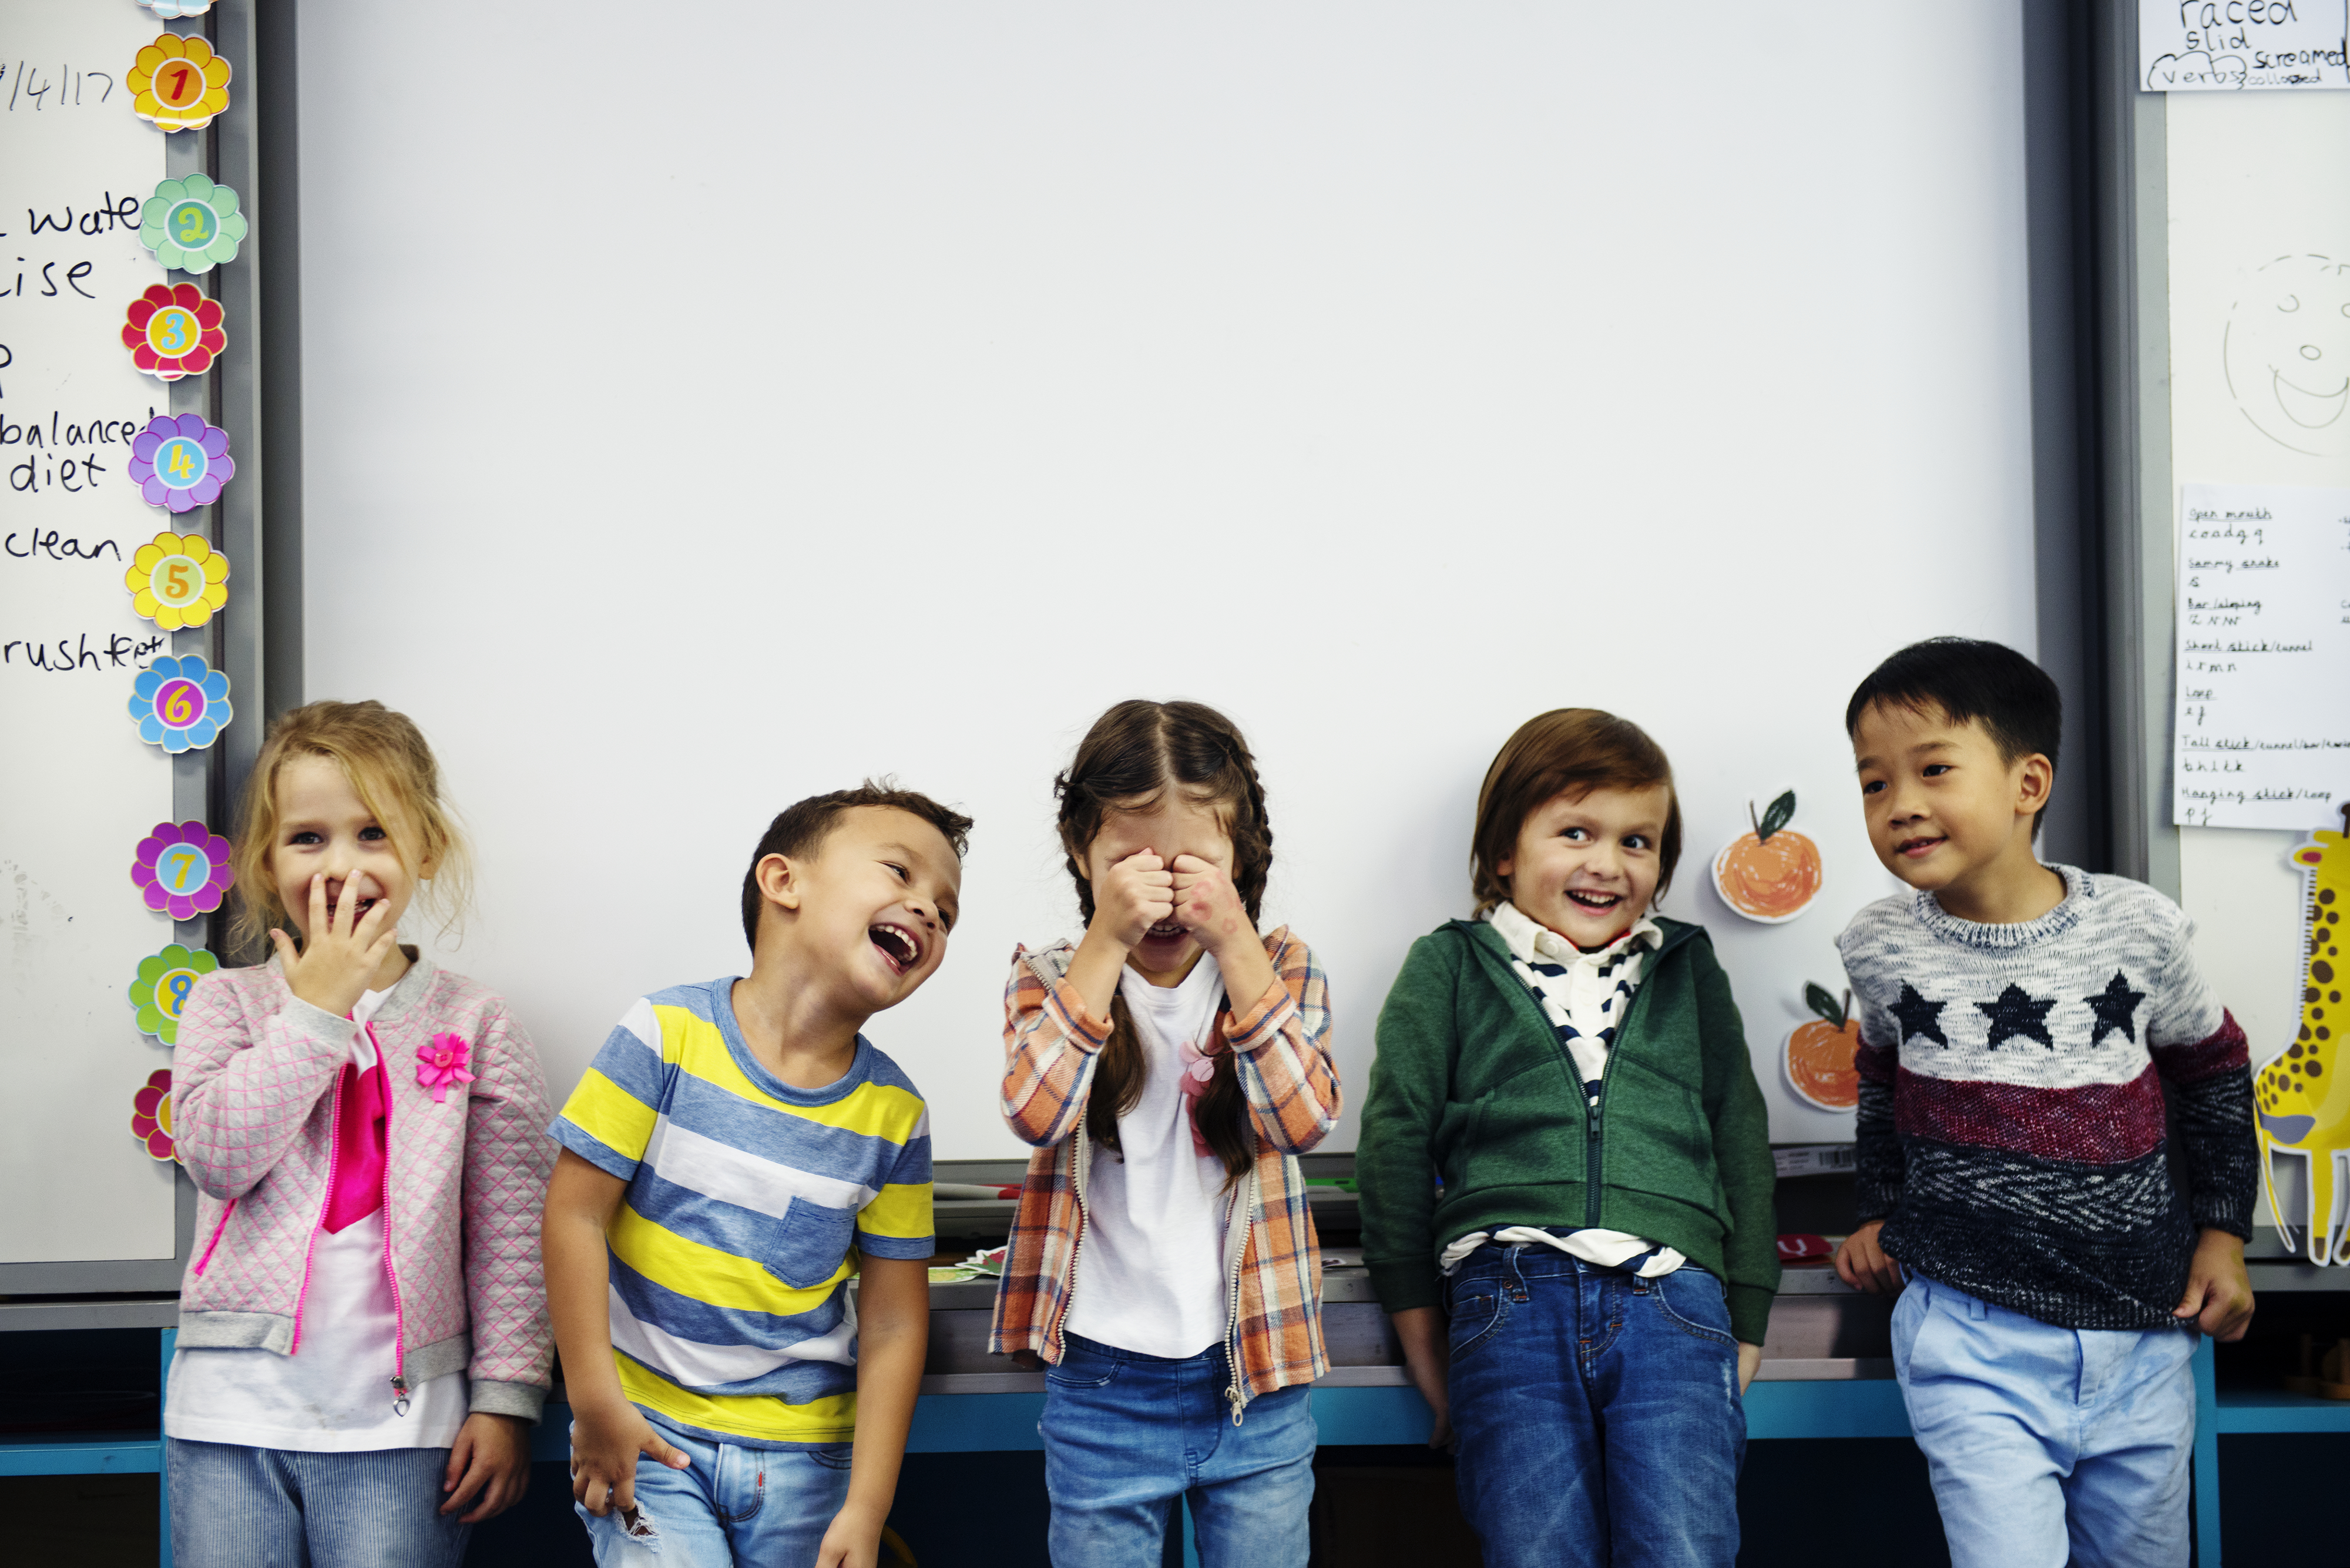 Five young students in the PK-3 age group are standing in front of a whiteboard with different happy expressions. Image by rawpixel.com on Freepik